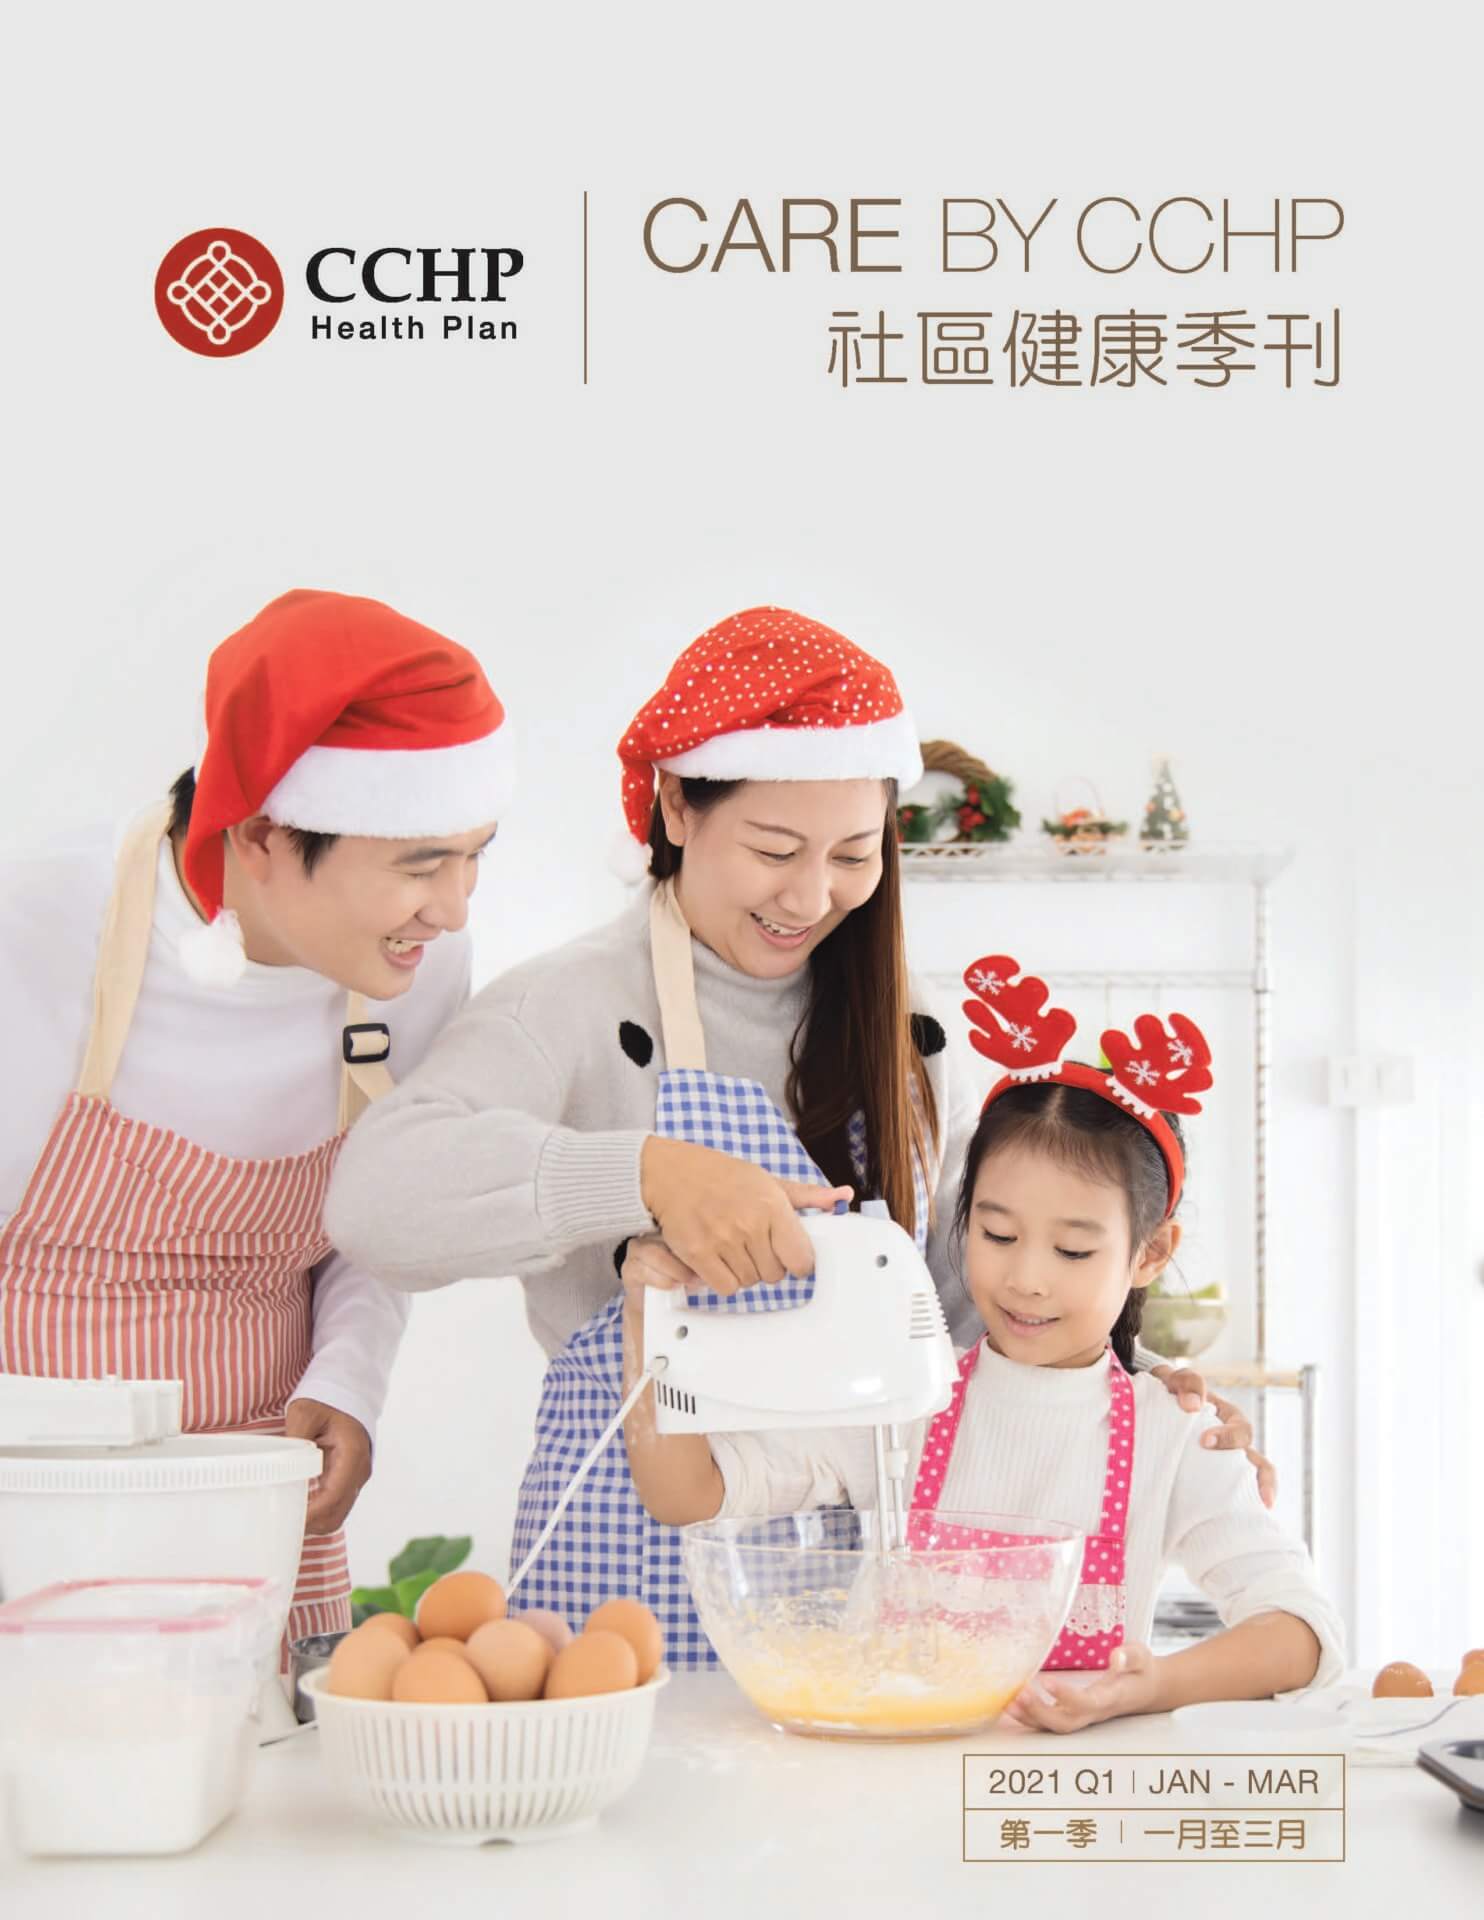 CCHP 2021 q1 newsletter cover, family making bakery in Christmas